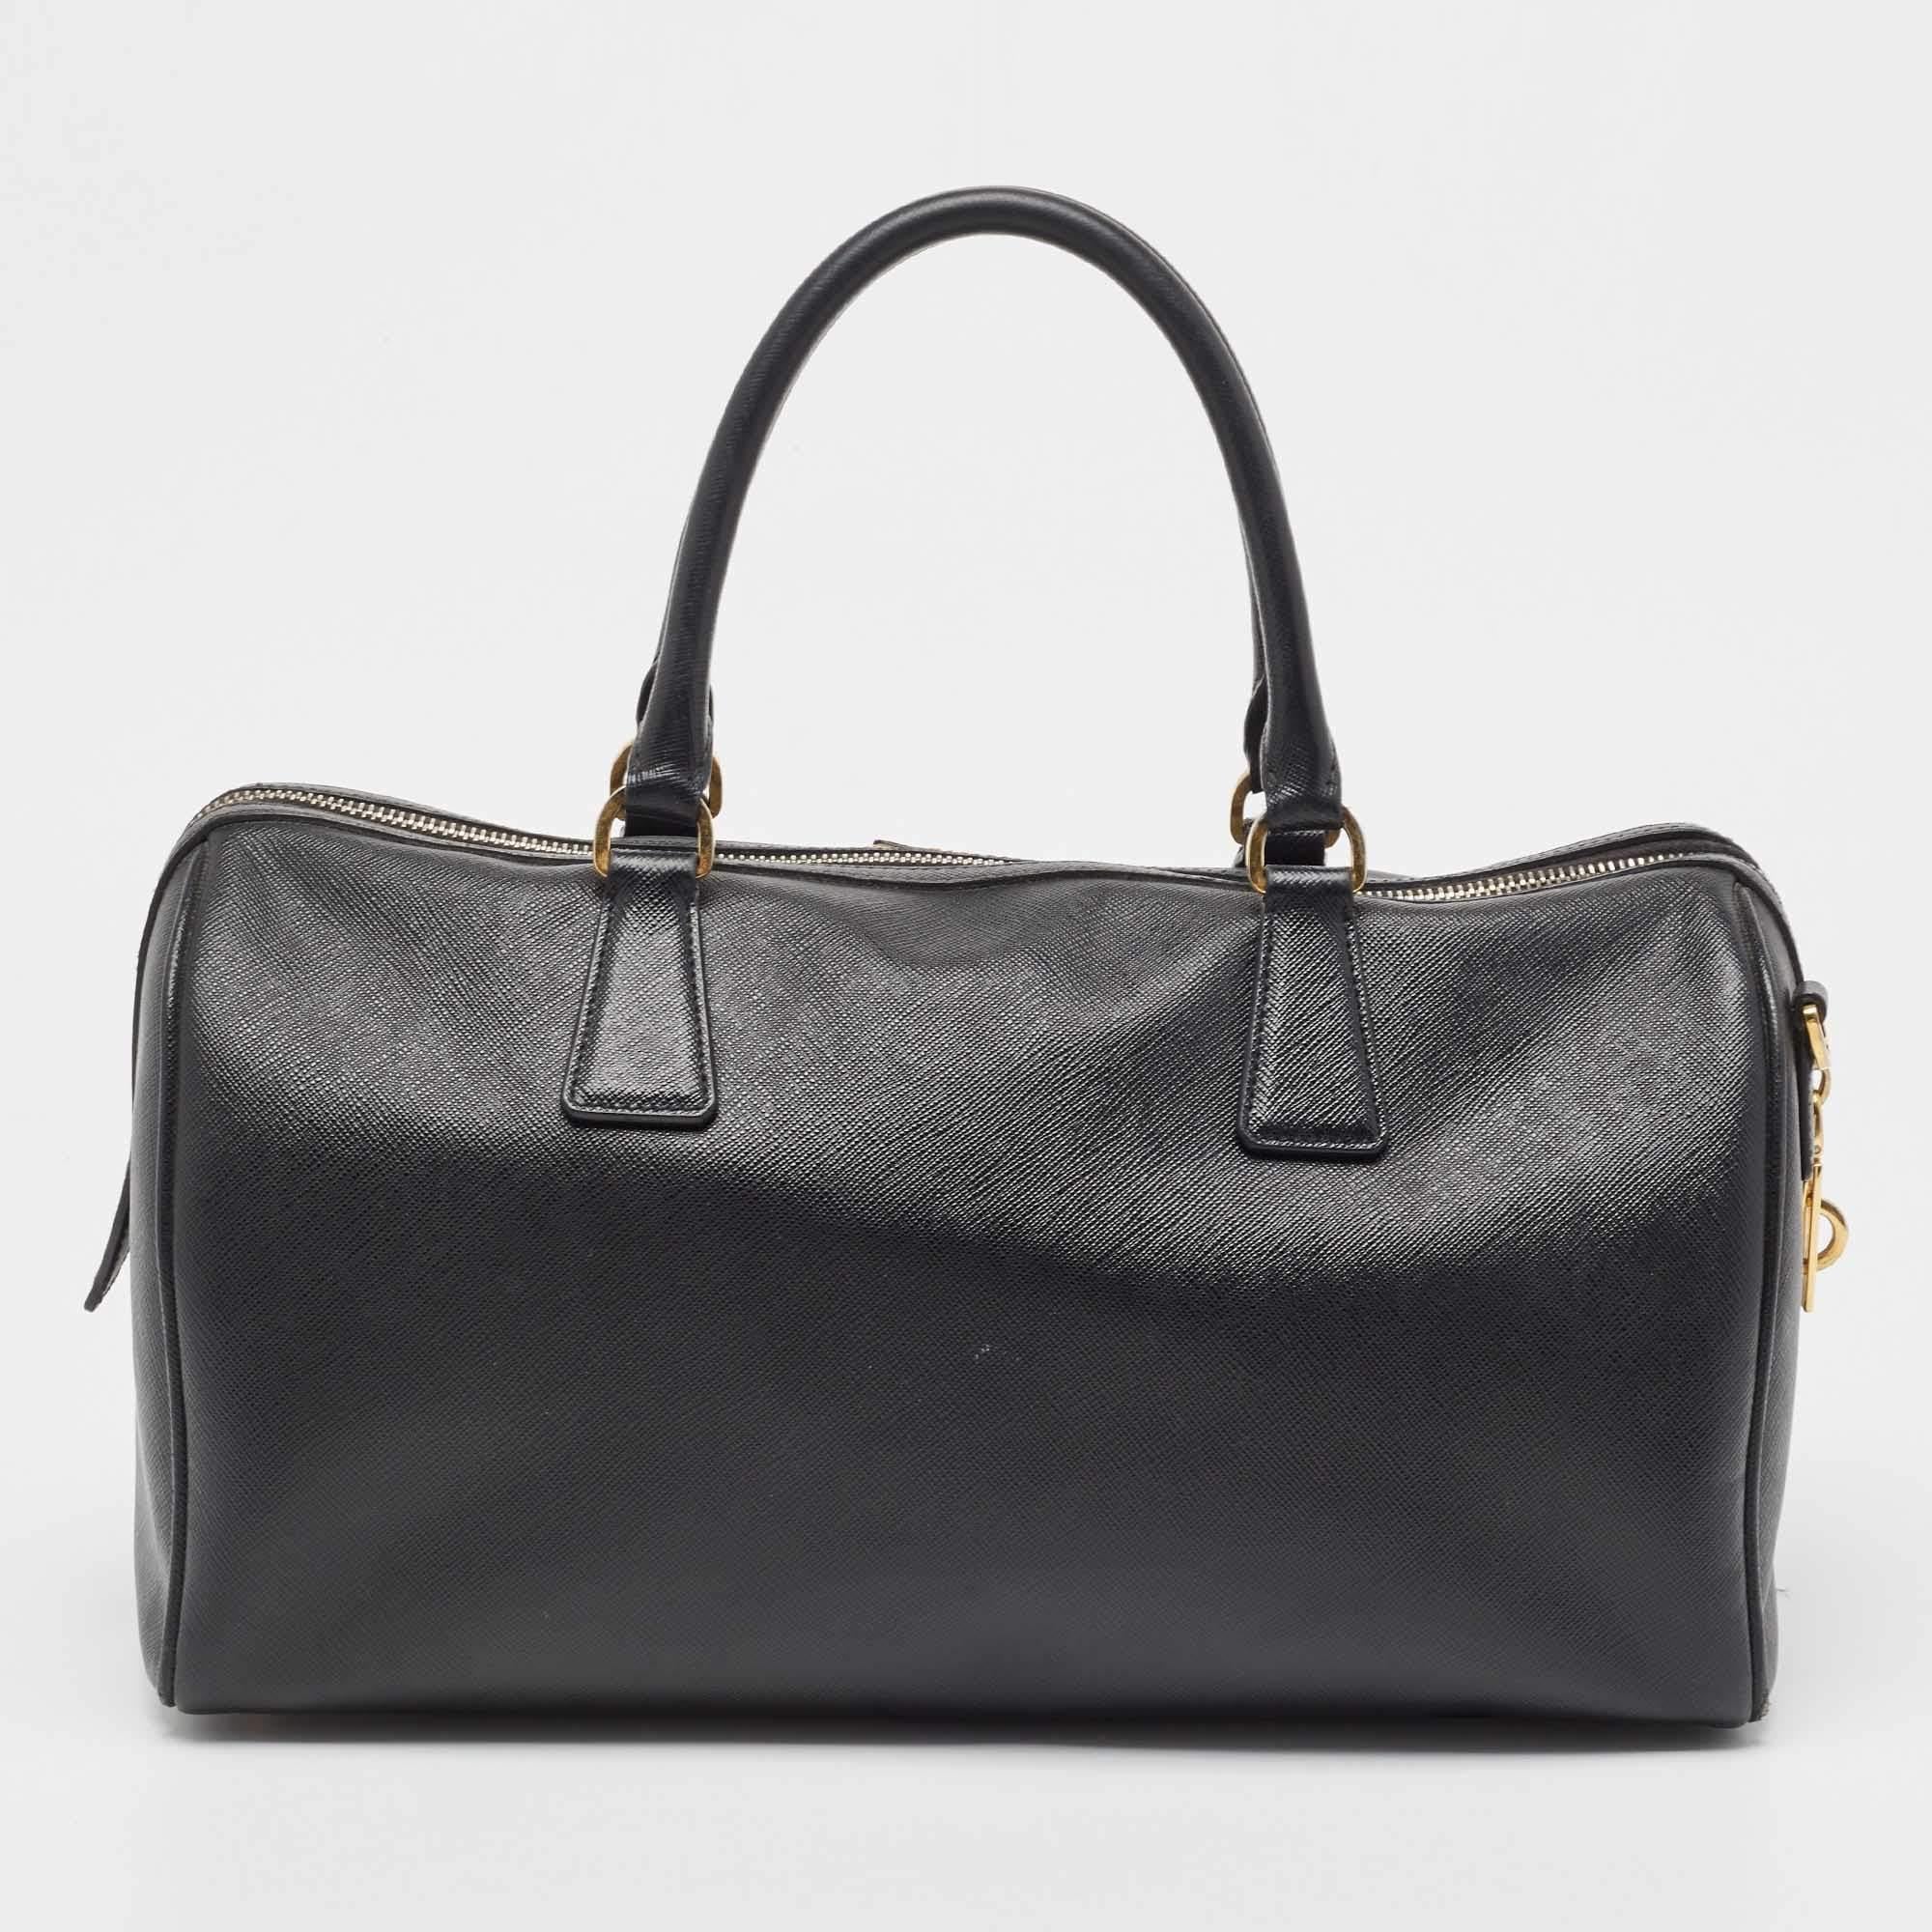 This Prada Boston bag is carefully crafted to offer you a luxurious accessory you will cherish. It is marked by high quality and enduring appeal. Invest in it today!

